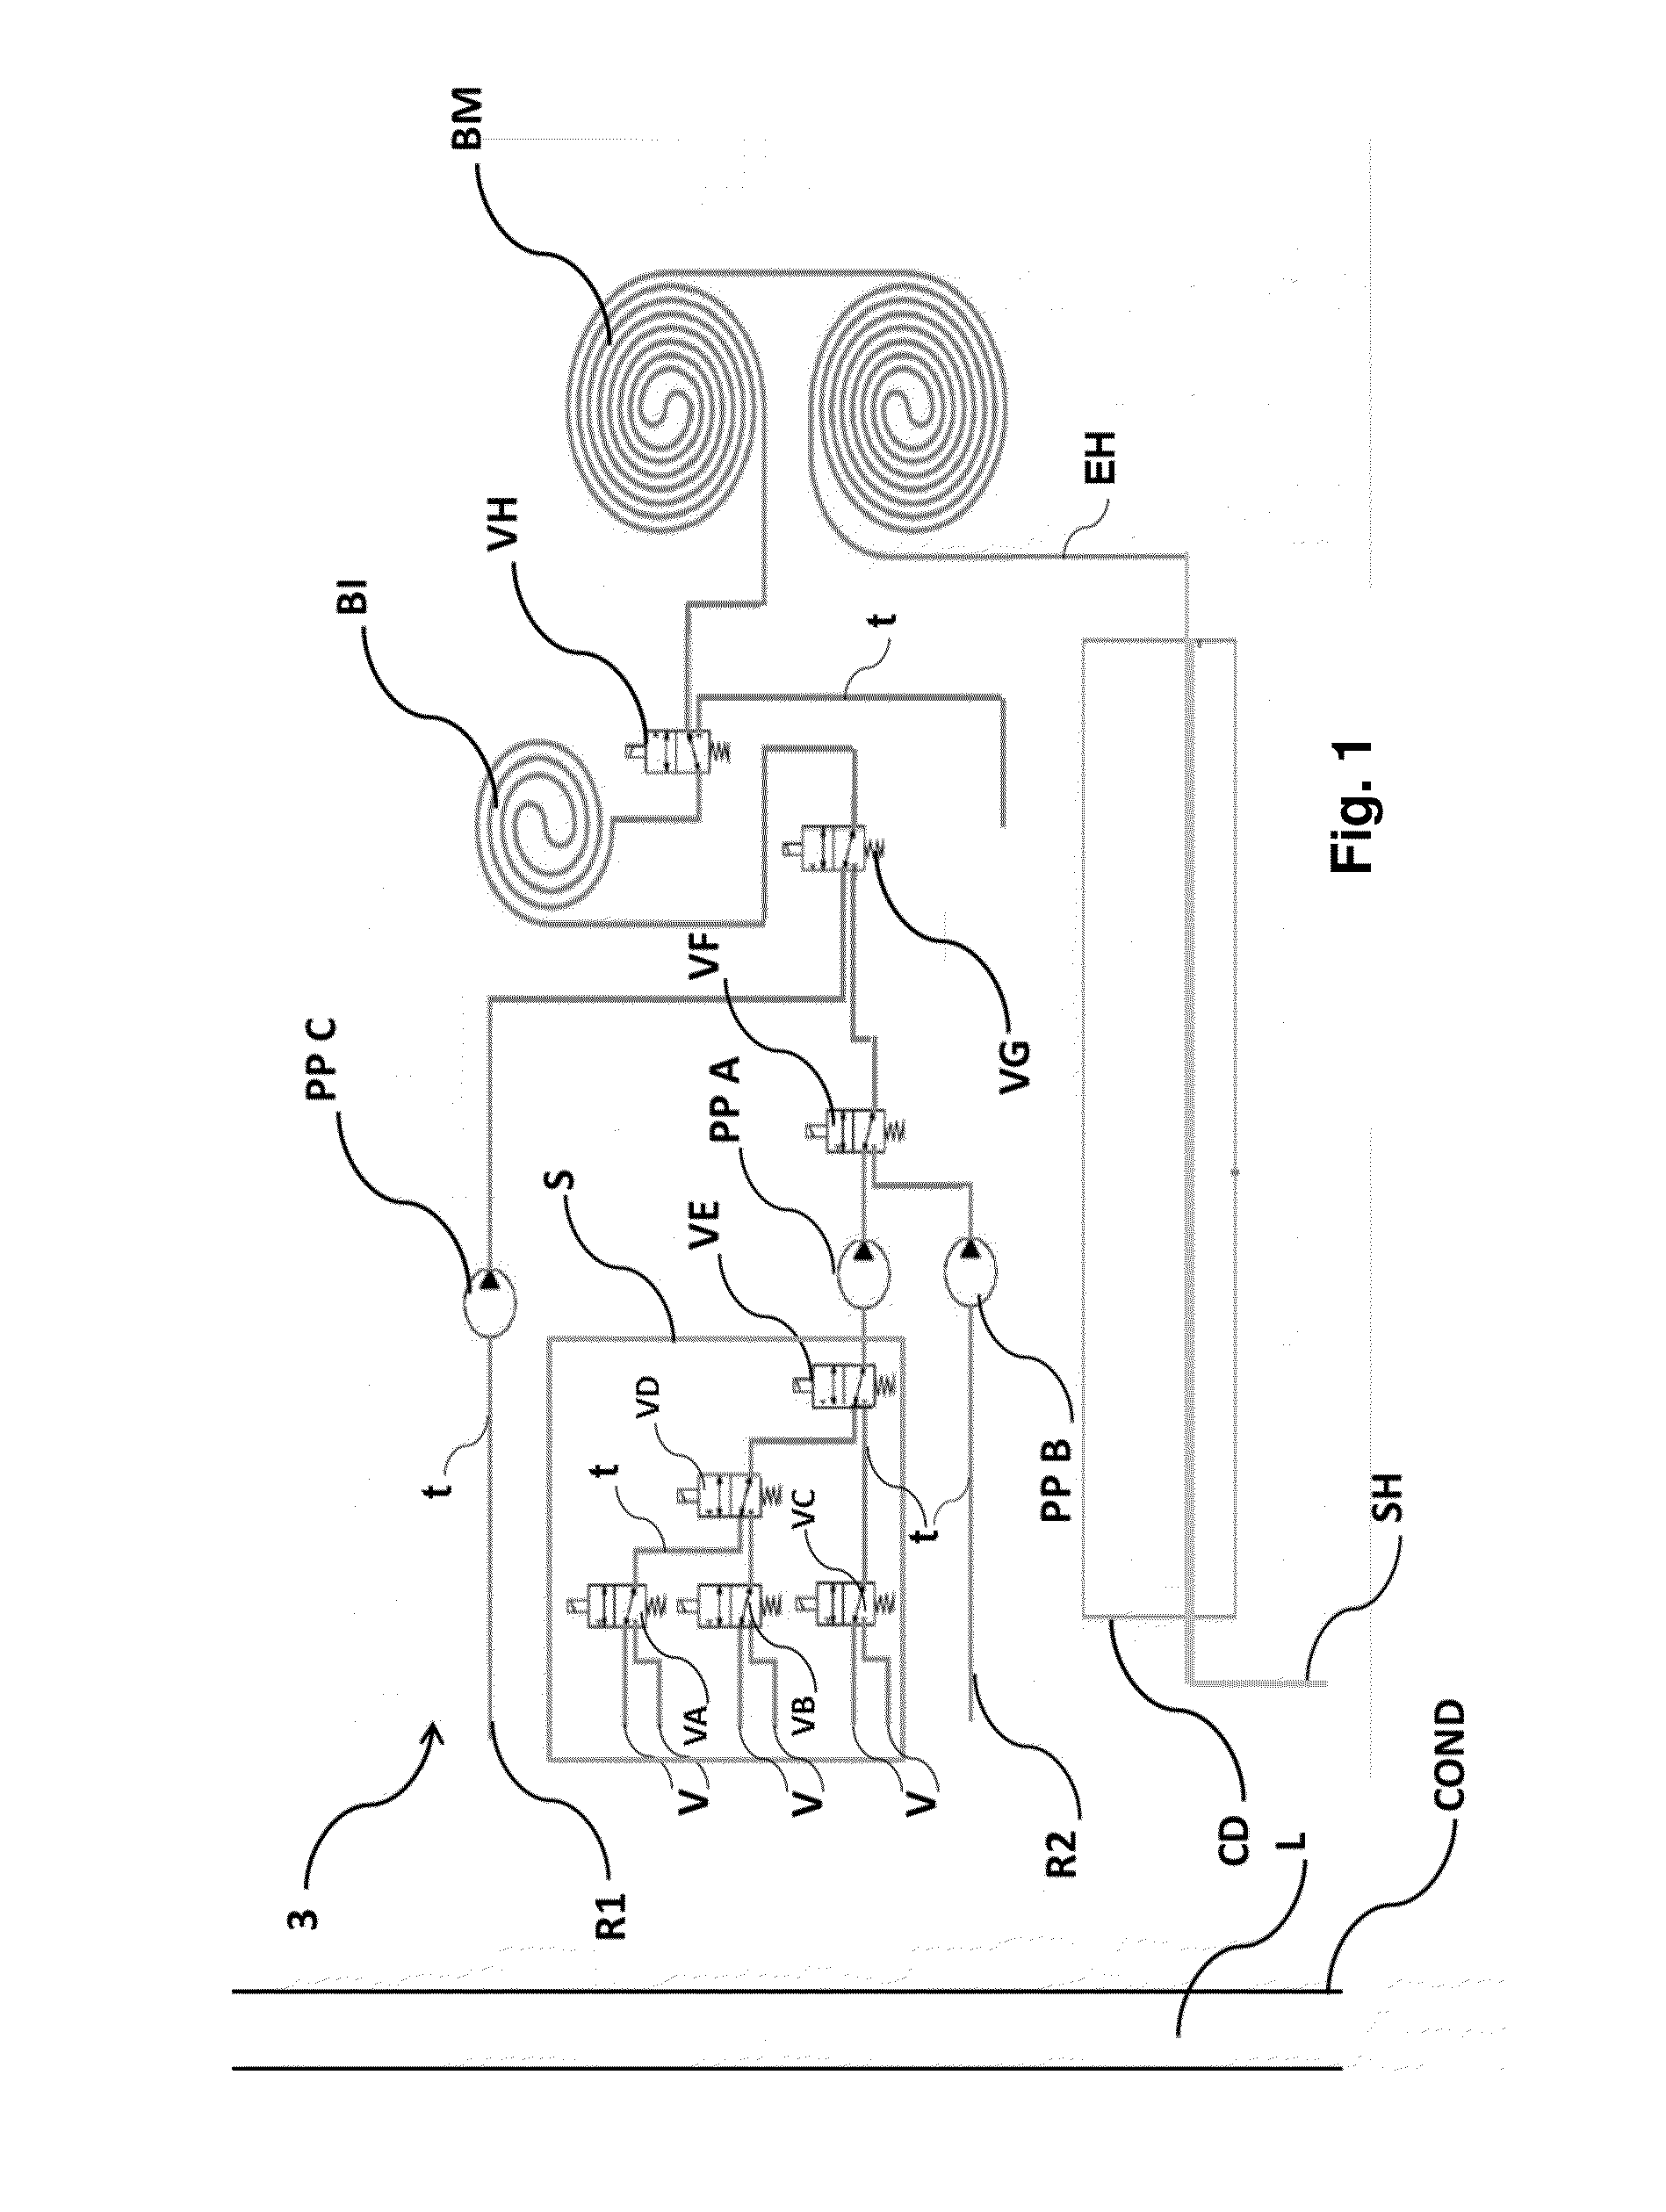 Method and device for analysing sulfates in a liquid